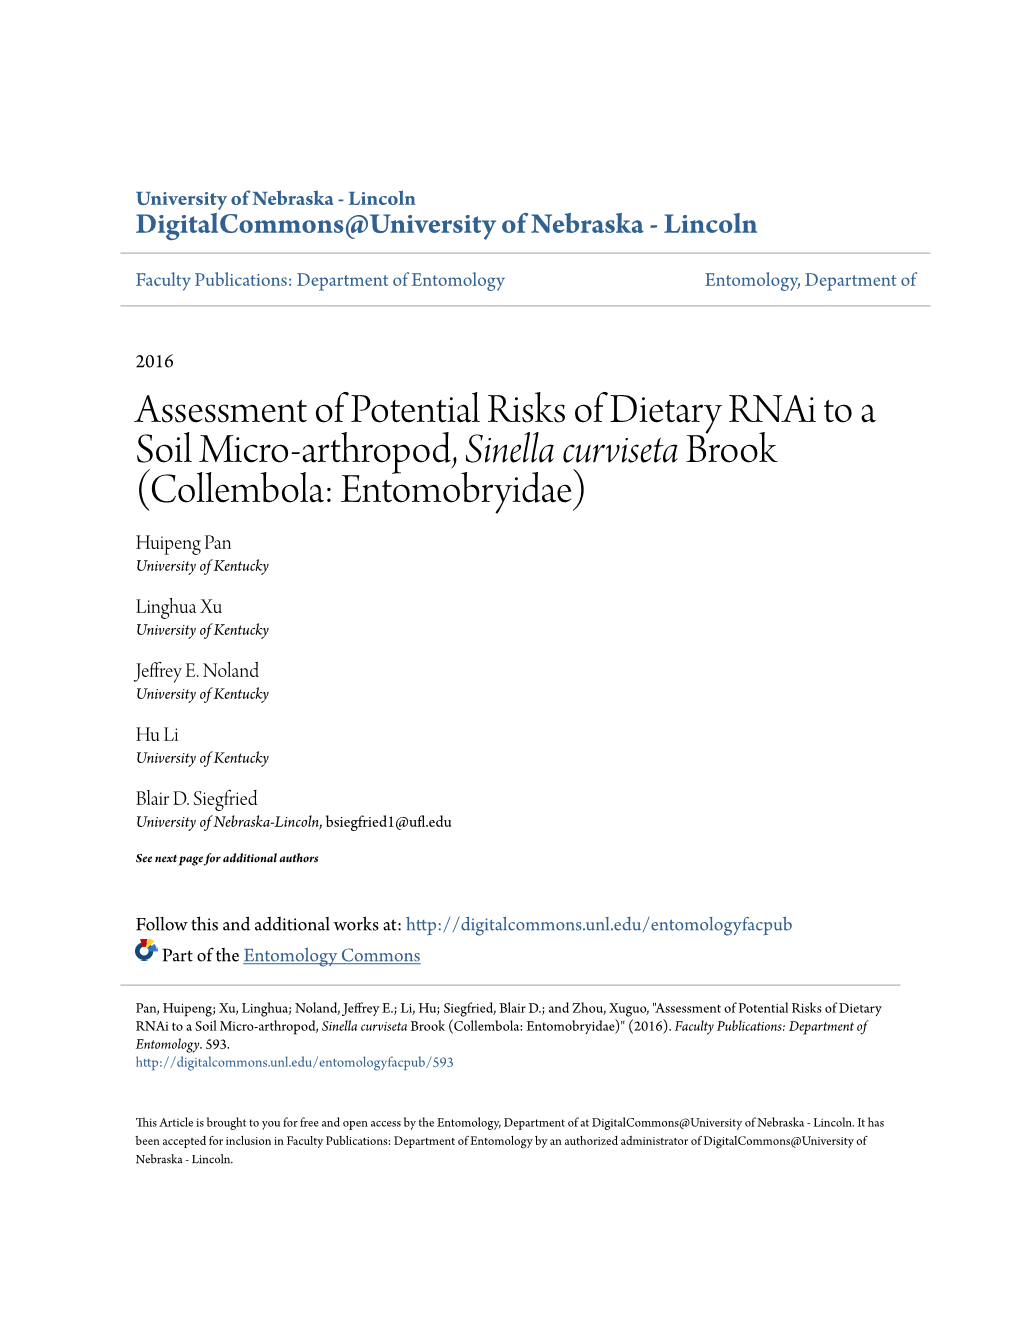 Assessment of Potential Risks of Dietary Rnai to a Soil Micro-Arthropod, Sinella Curviseta Brook (Collembola: Entomobryidae) Huipeng Pan University of Kentucky